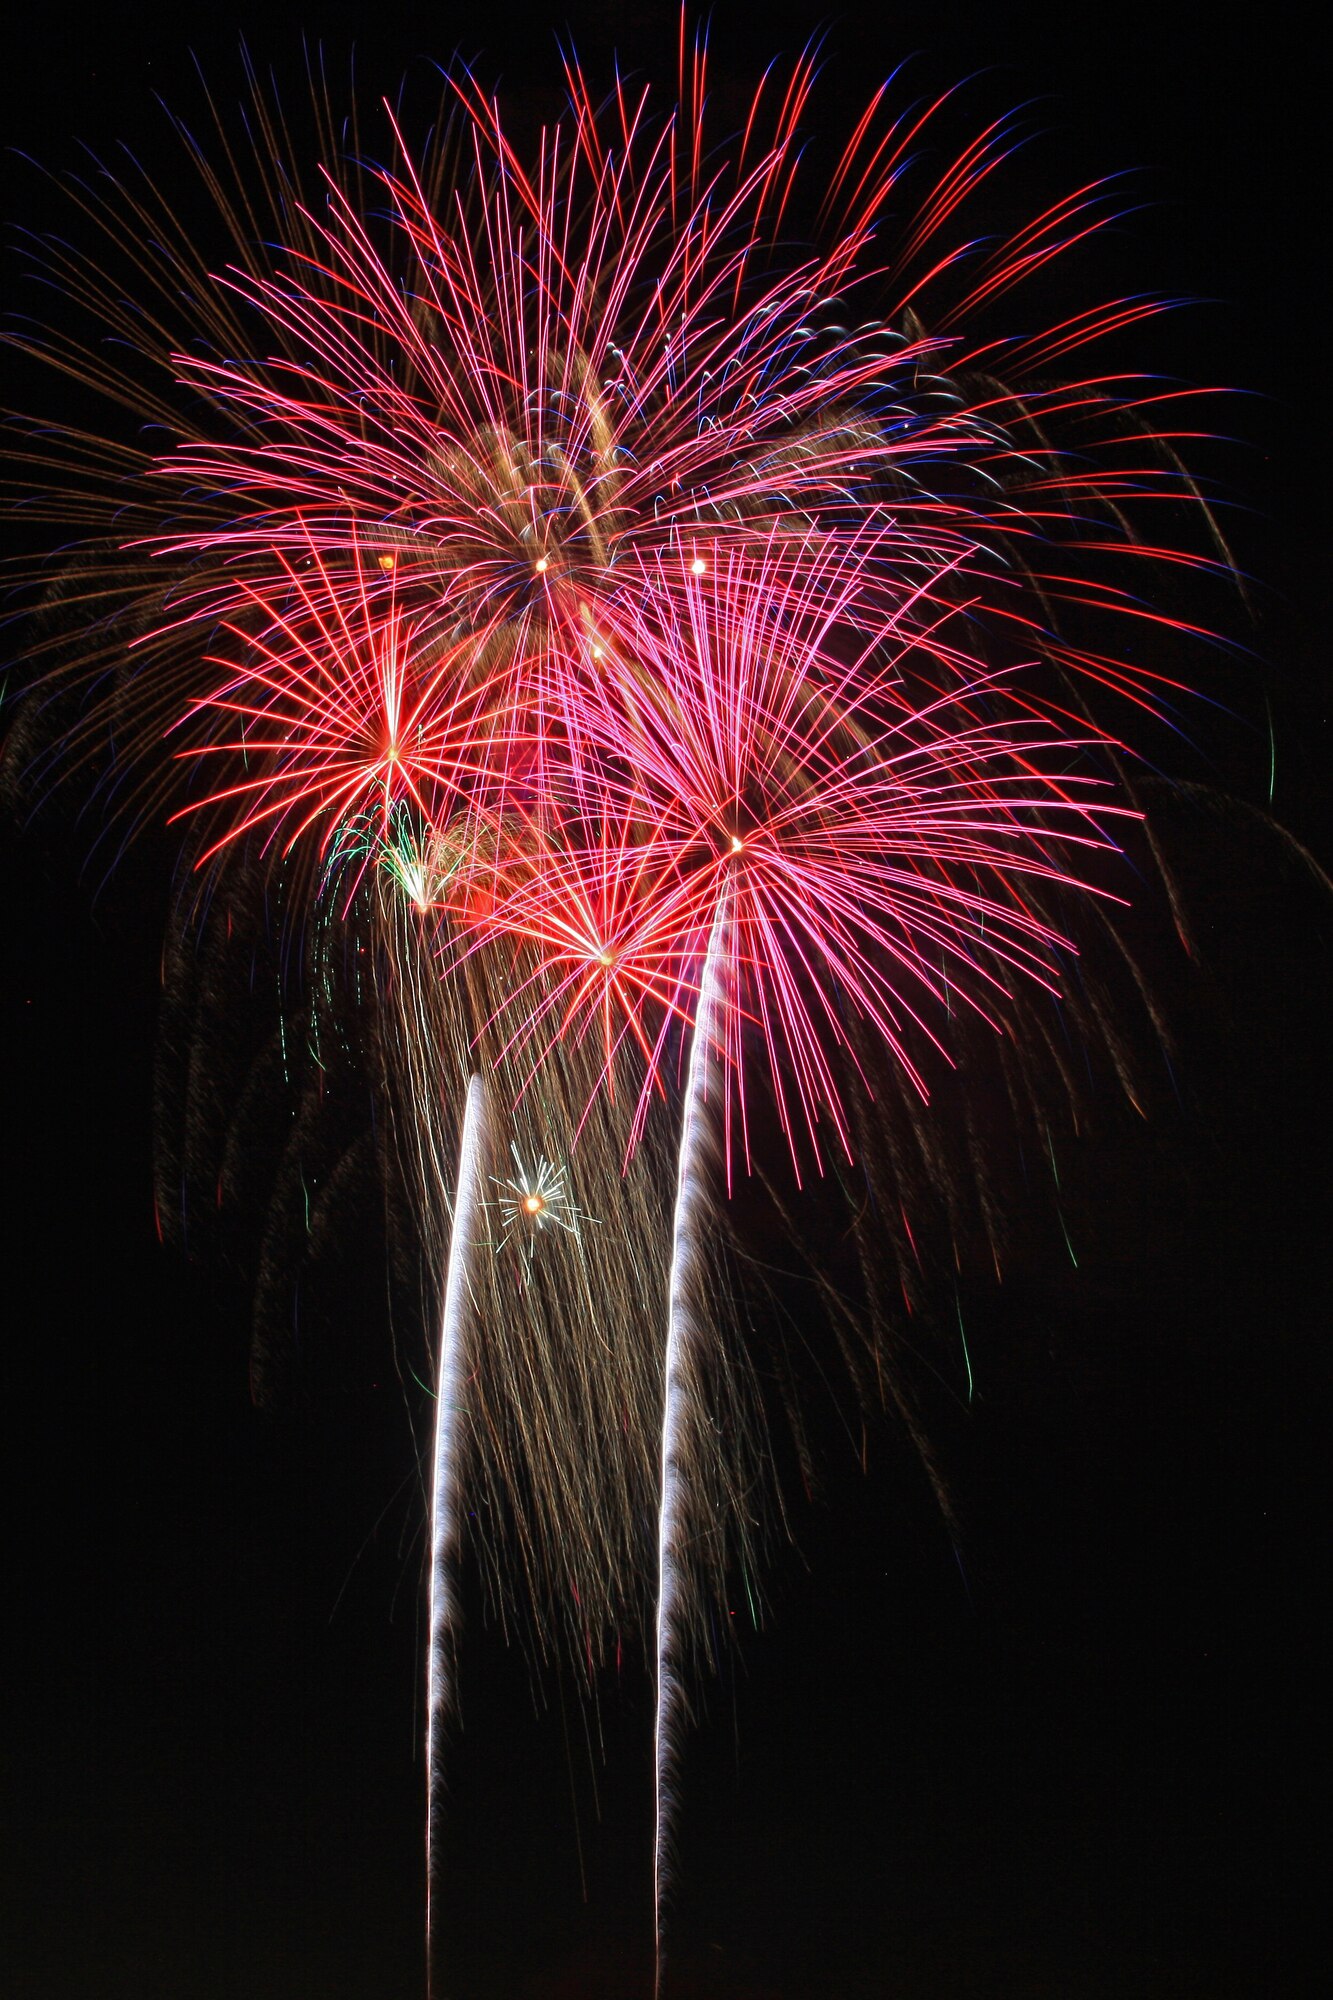 Fireworks paint the sky over Joint Forces Training Base, Los Alamitos, California, July 4, 2018. The installation partners with local communities to present the community's annual July 4 Fireworks Spectacular event. The nearly five-hour event featured vendors and military displays, musical performances, and culminated in a 25-minute fireworks show set to patriotic music. (U.S. Air National Guard photo by Senior Airman Crystal Housman)